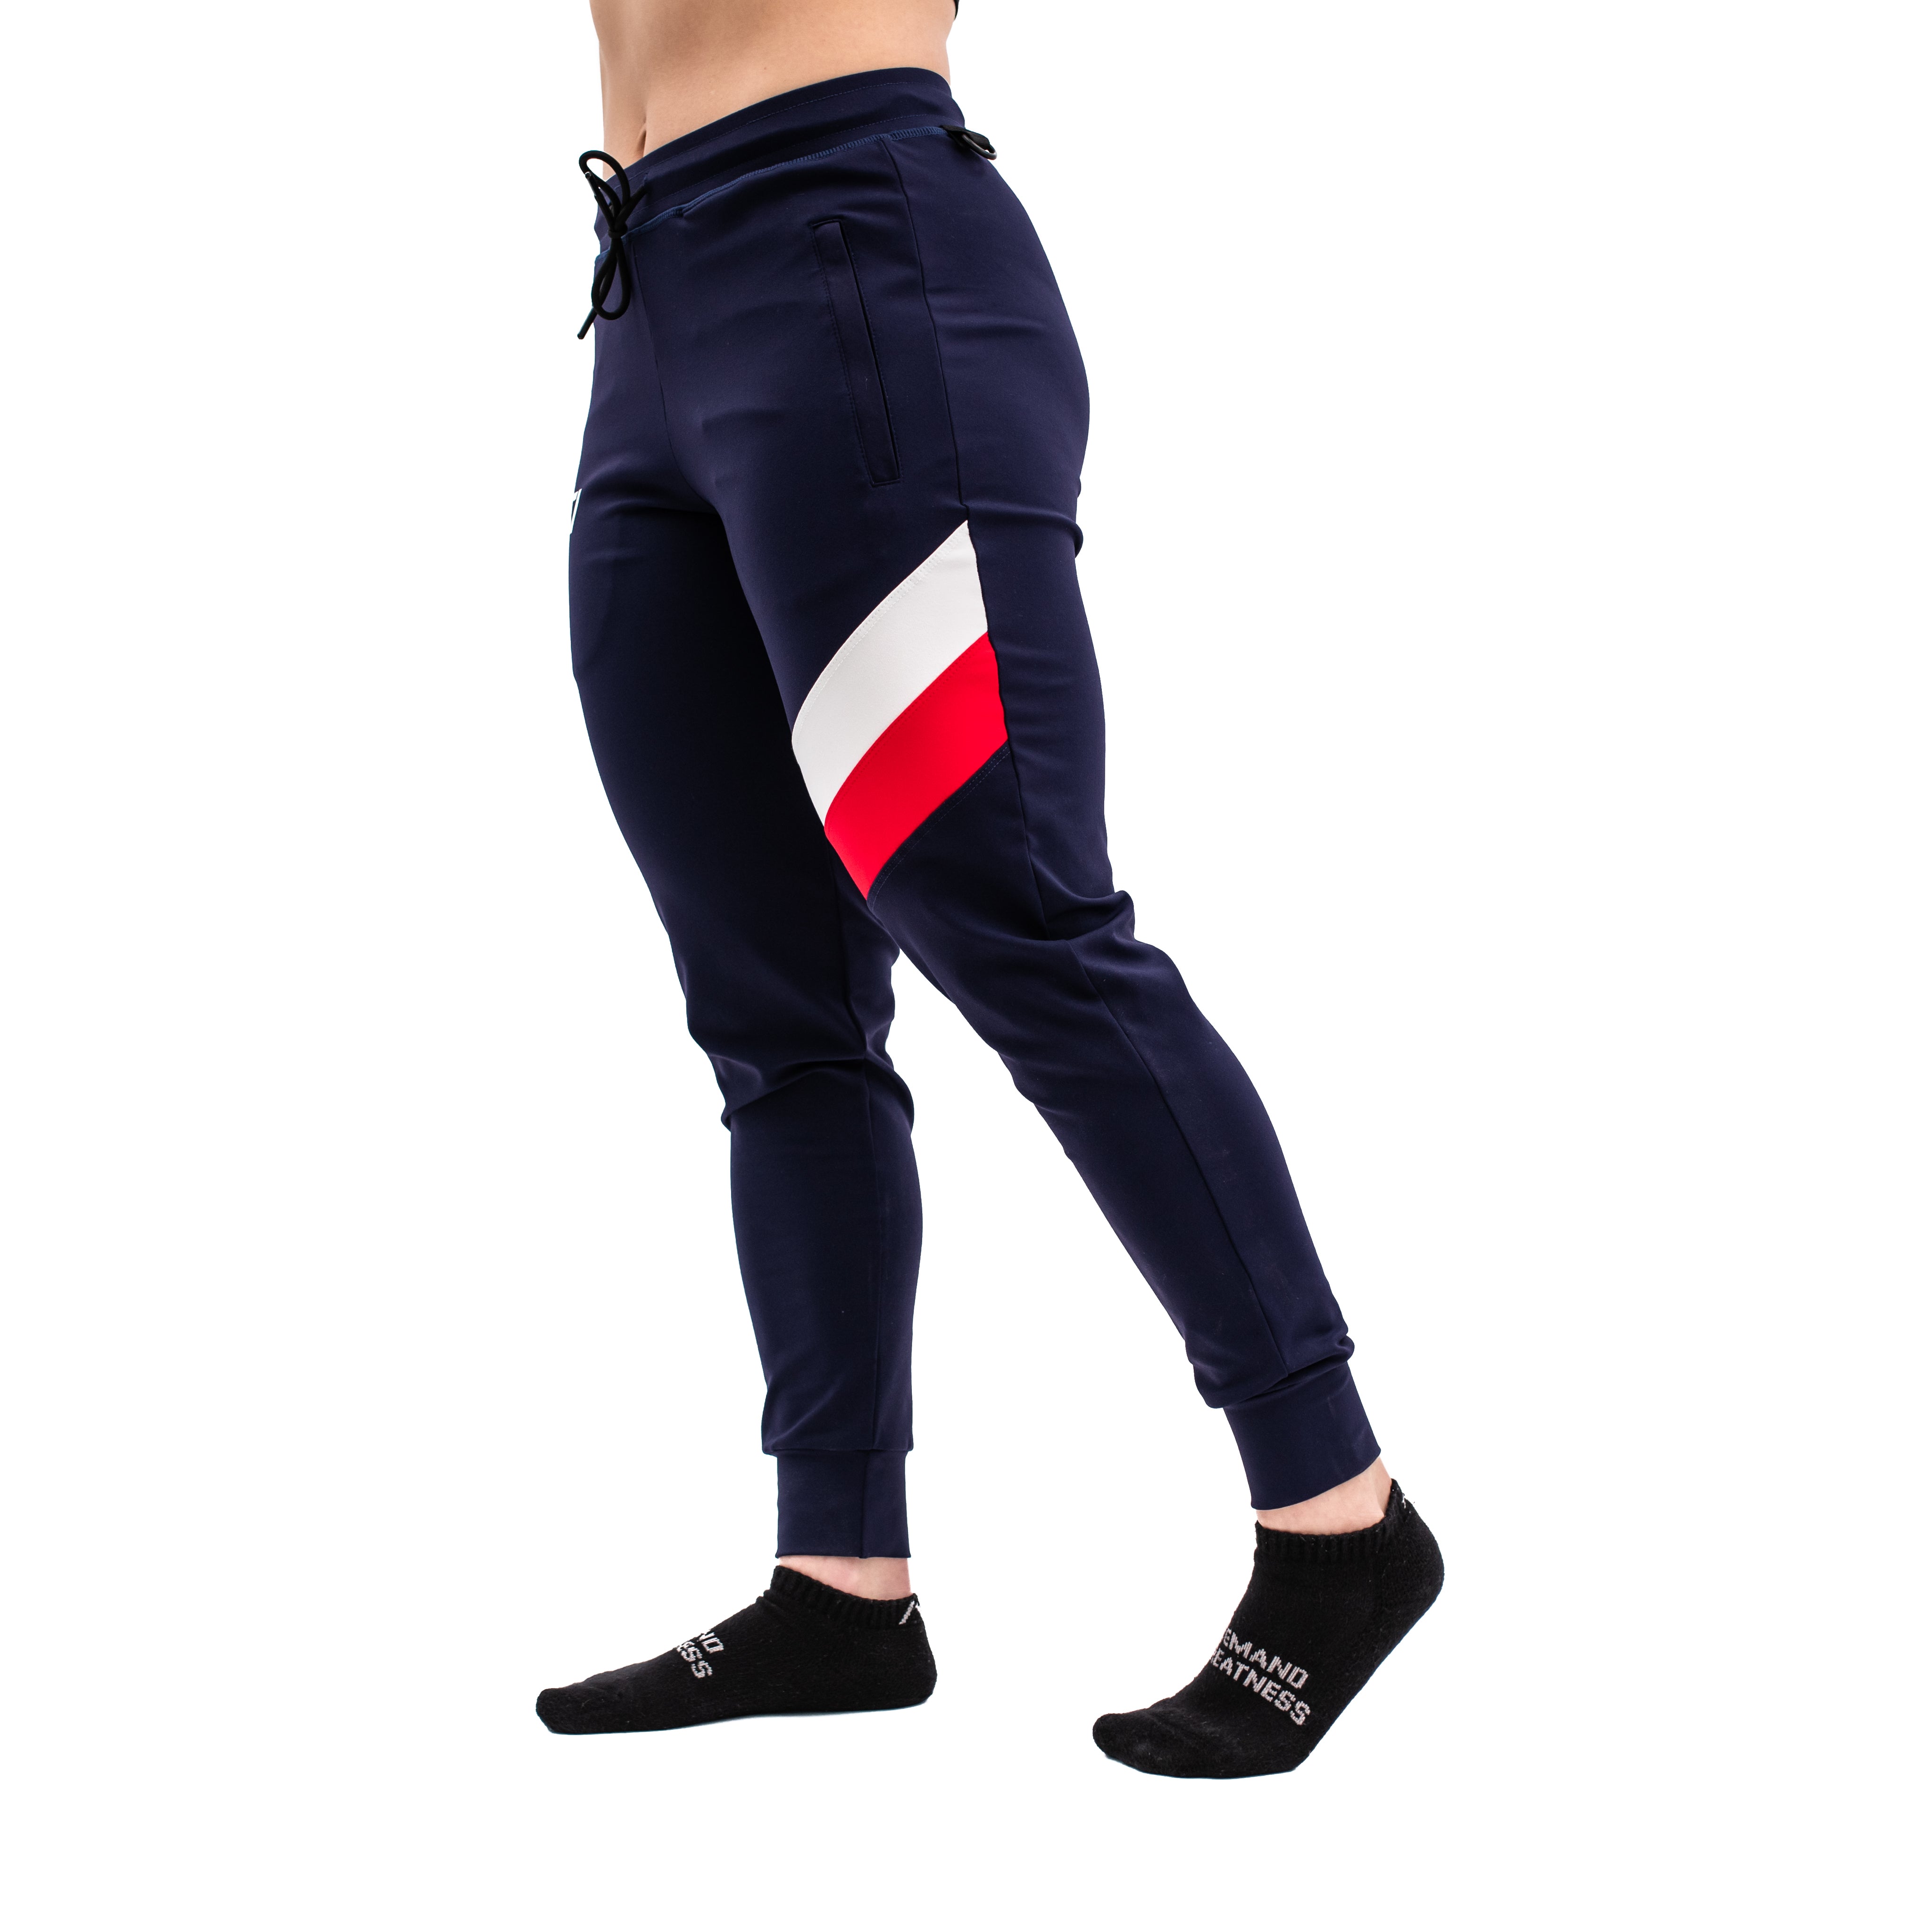 Defy joggers are just as comfortable in the gym as they are going out. These are made with premium moisture-wicking 4-way-stretch material for greater range of motion. These are a great fit for both men and women. Available in UK and Europe including France, Italy, Germany, Sweden and Poland.